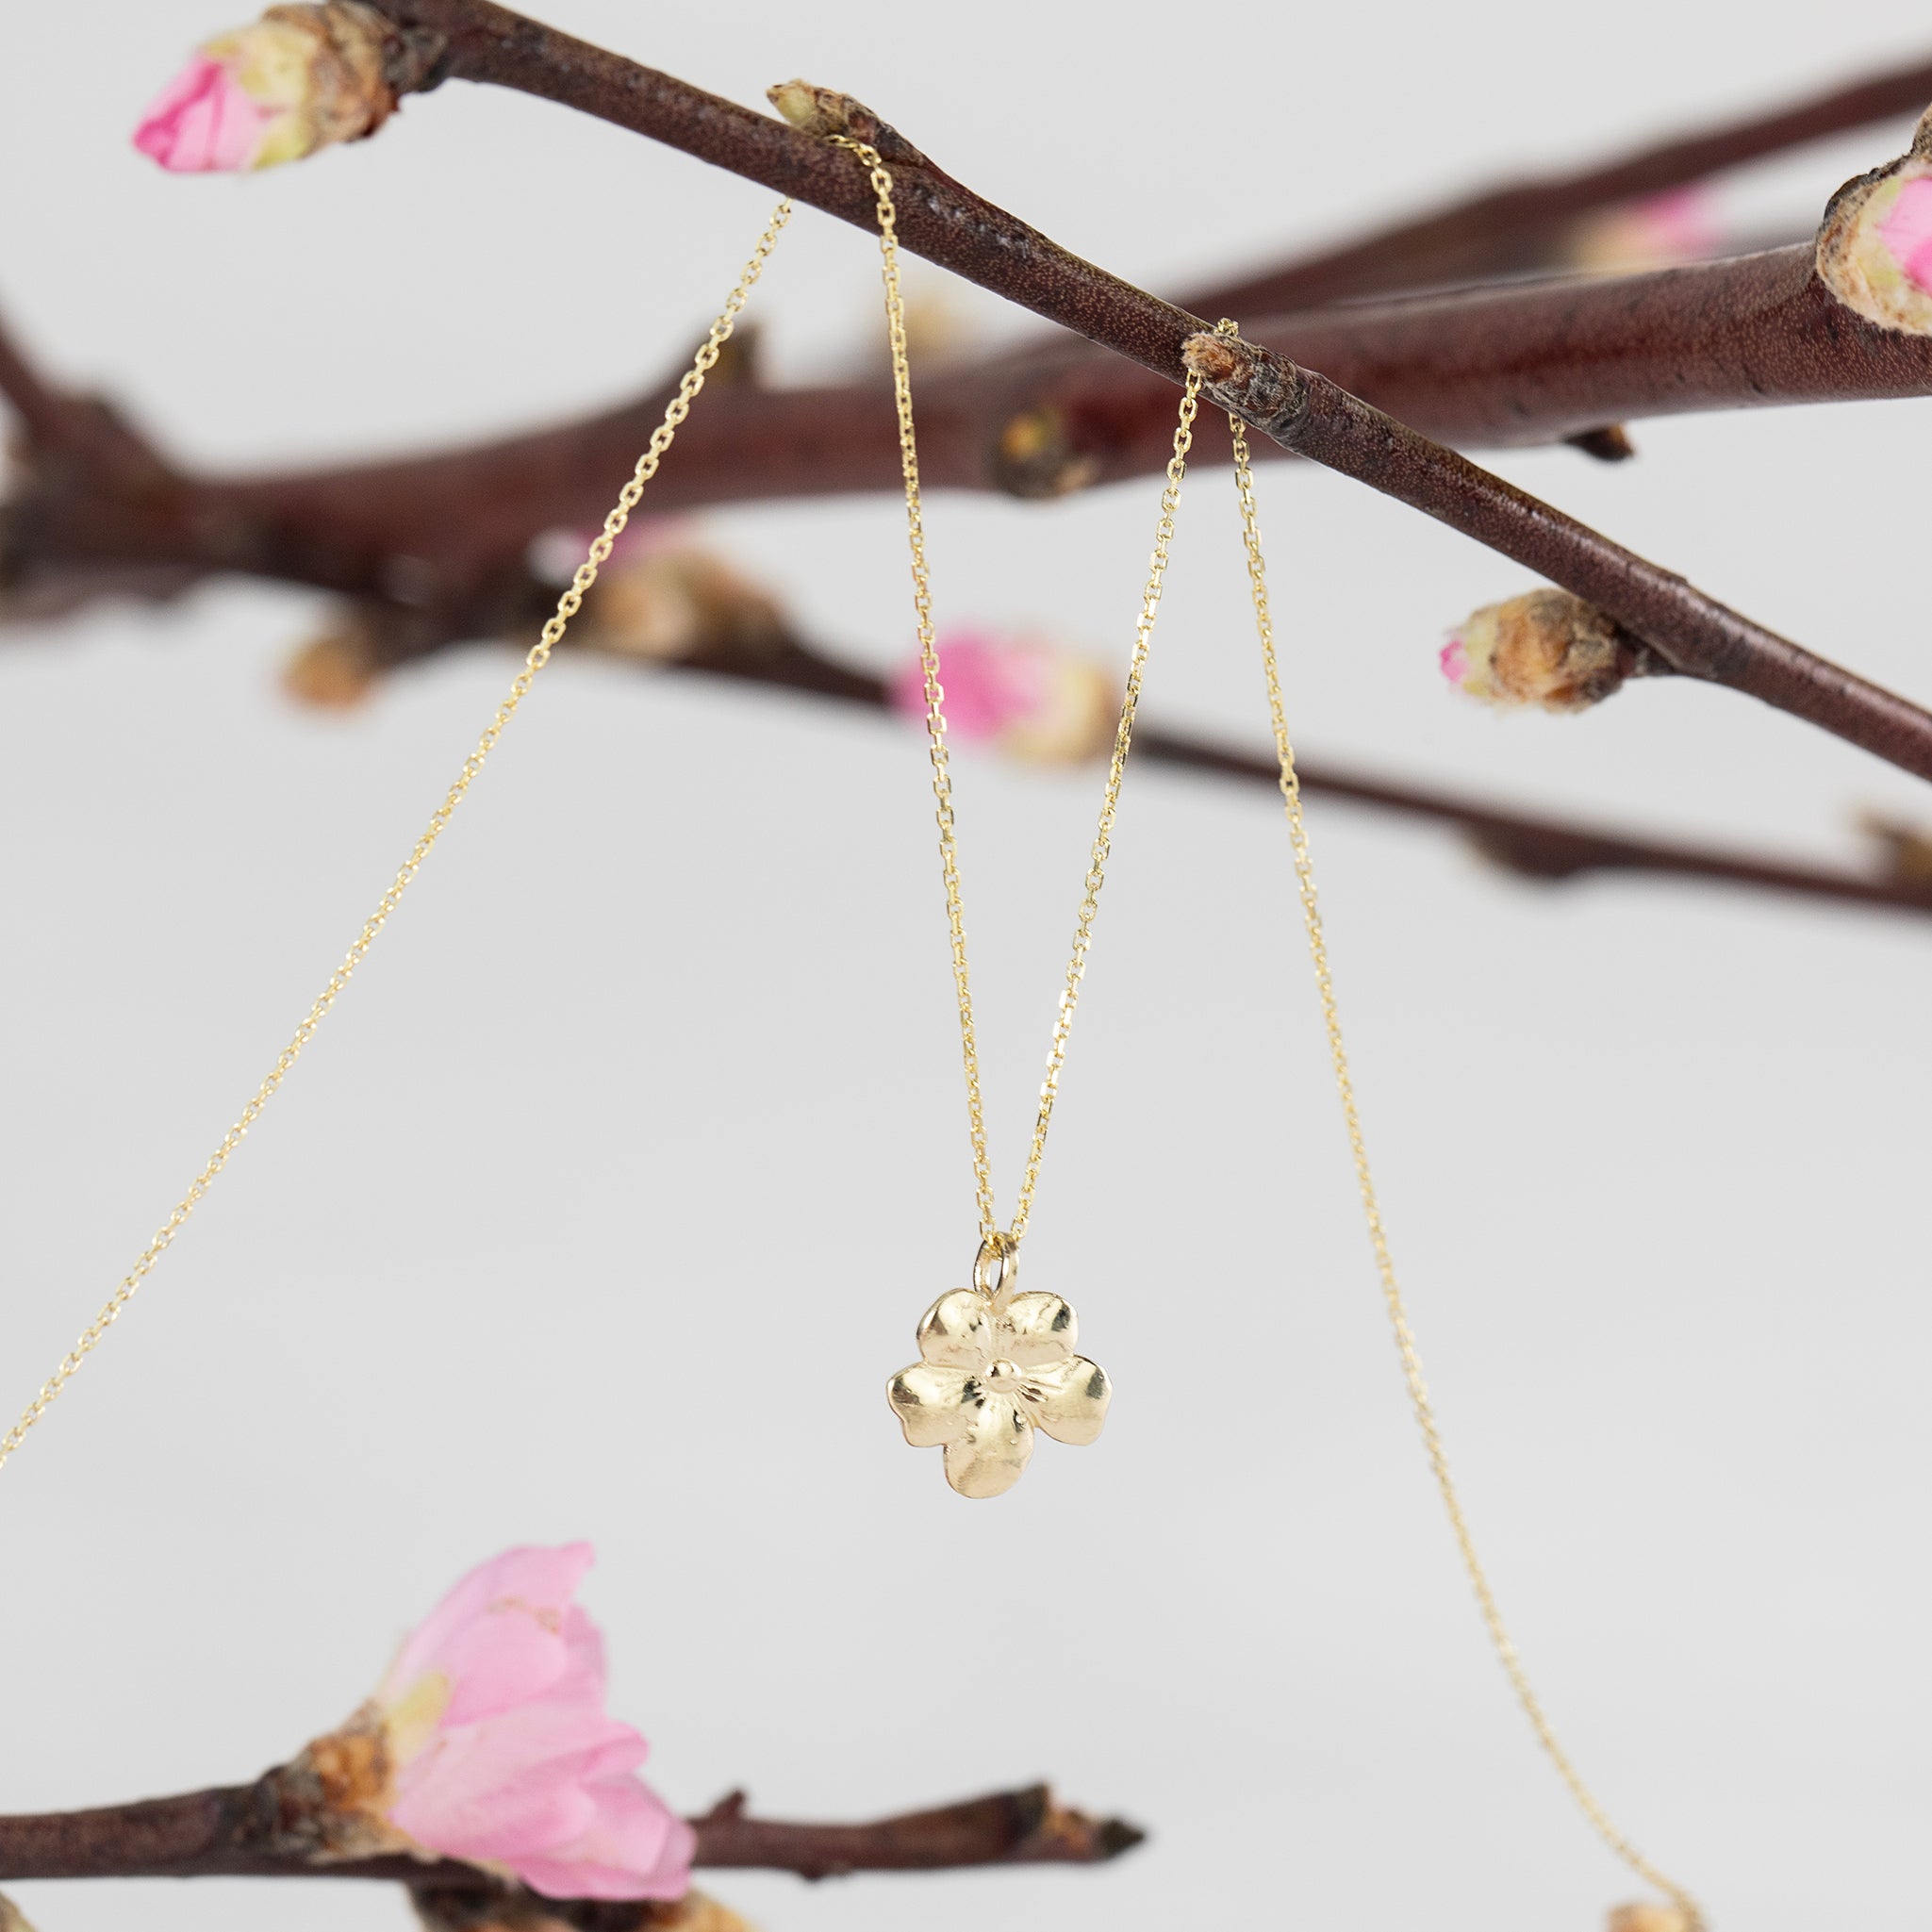 Buy Cherry Blossom Necklace Sakura Necklace Peach Blossom Flower Necklace  Rose Quartz Necklace Gold Necklace Pink Online in India - Etsy